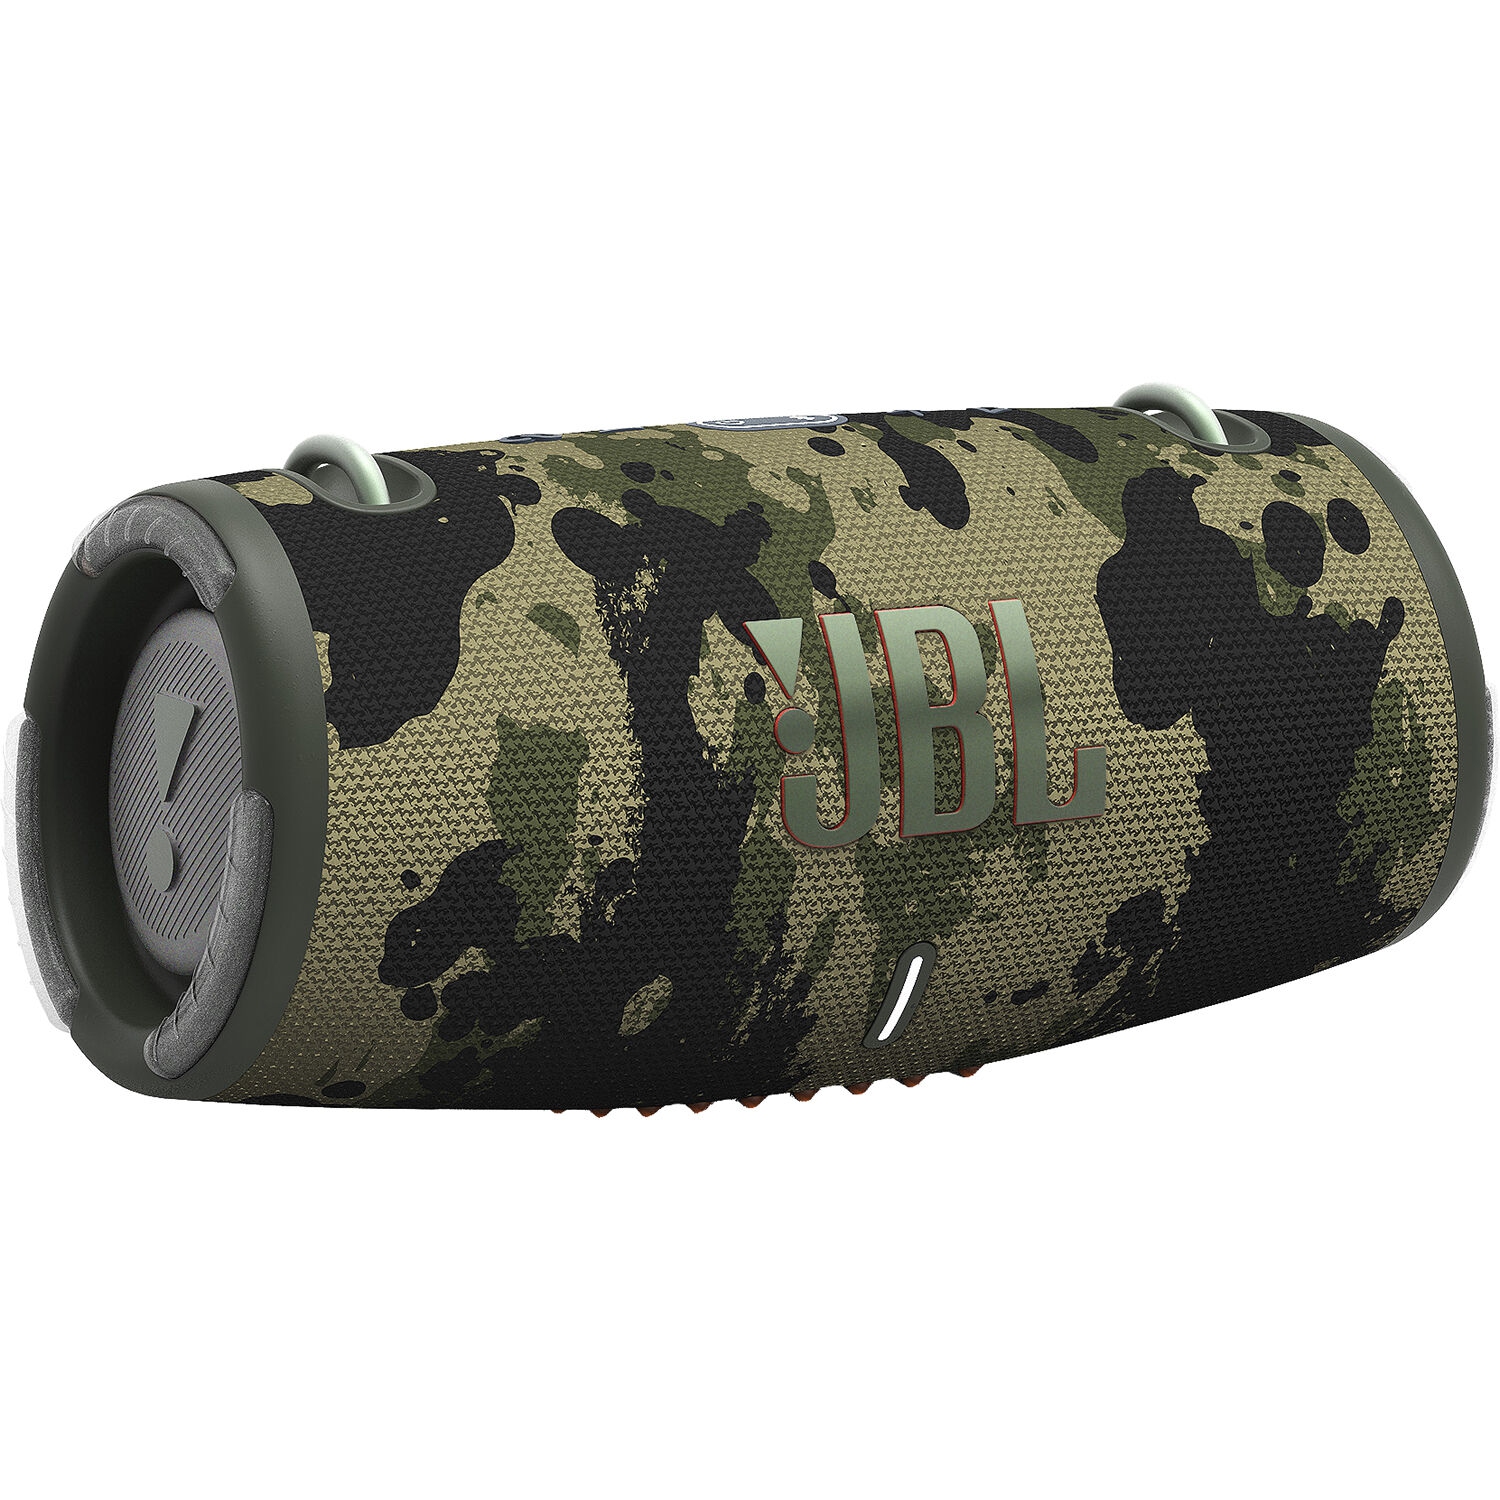 Refurbished (Excellent) - JBL Xtreme 3 - Portable Bluetooth Speaker, Powerful Sound and deep bass, IP67 Waterproof, 15 Hours of Playtime, powerbank, JBL PartyBoost (Camo)